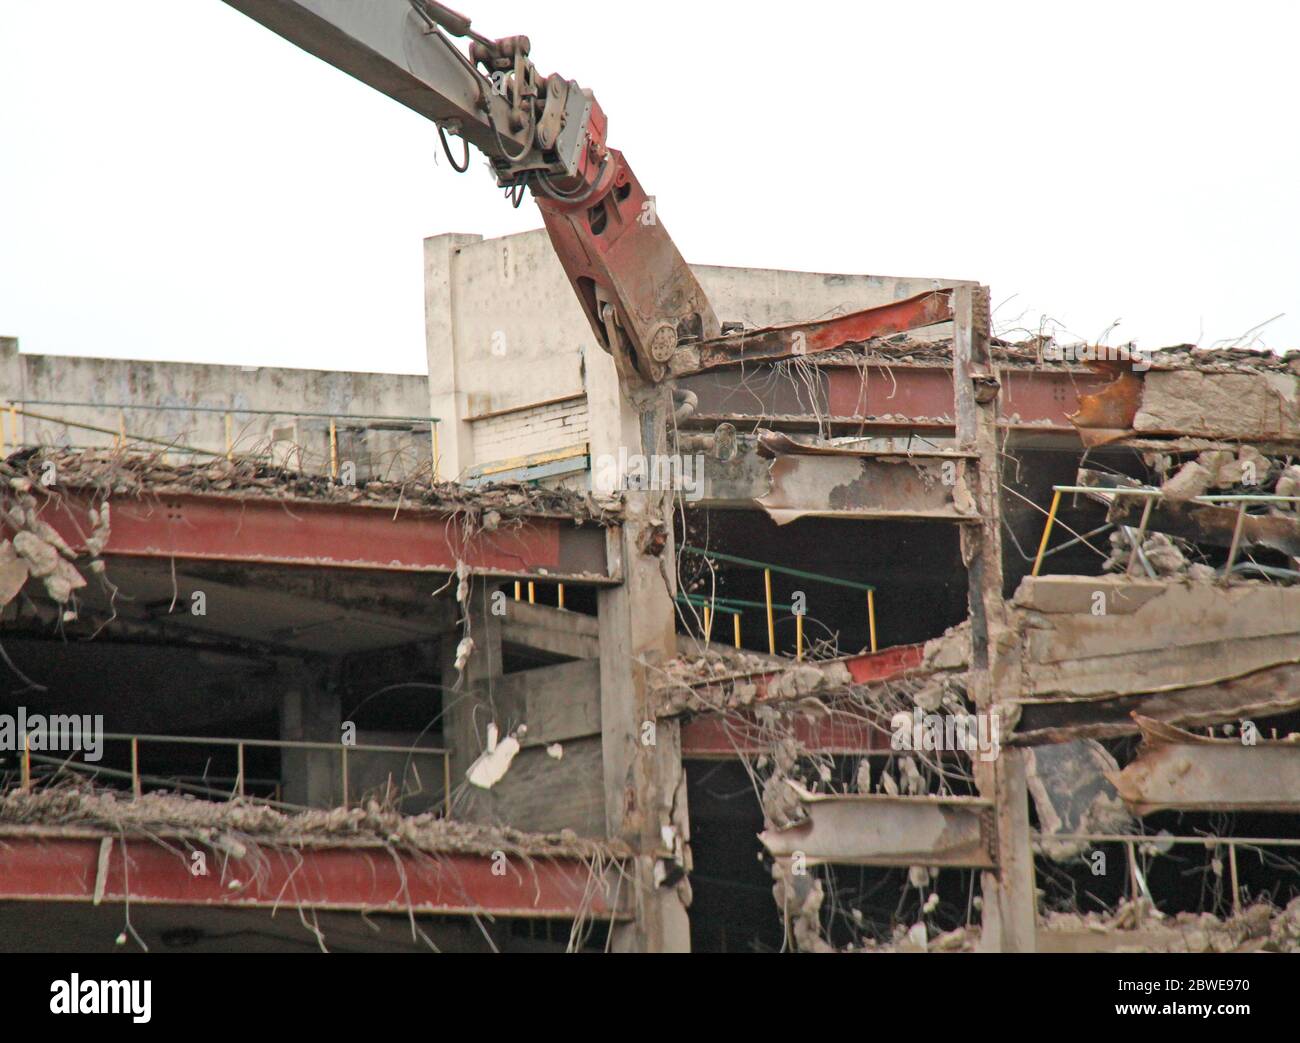 Debris Being Pulled from a Building Demolition Site. Stock Photo